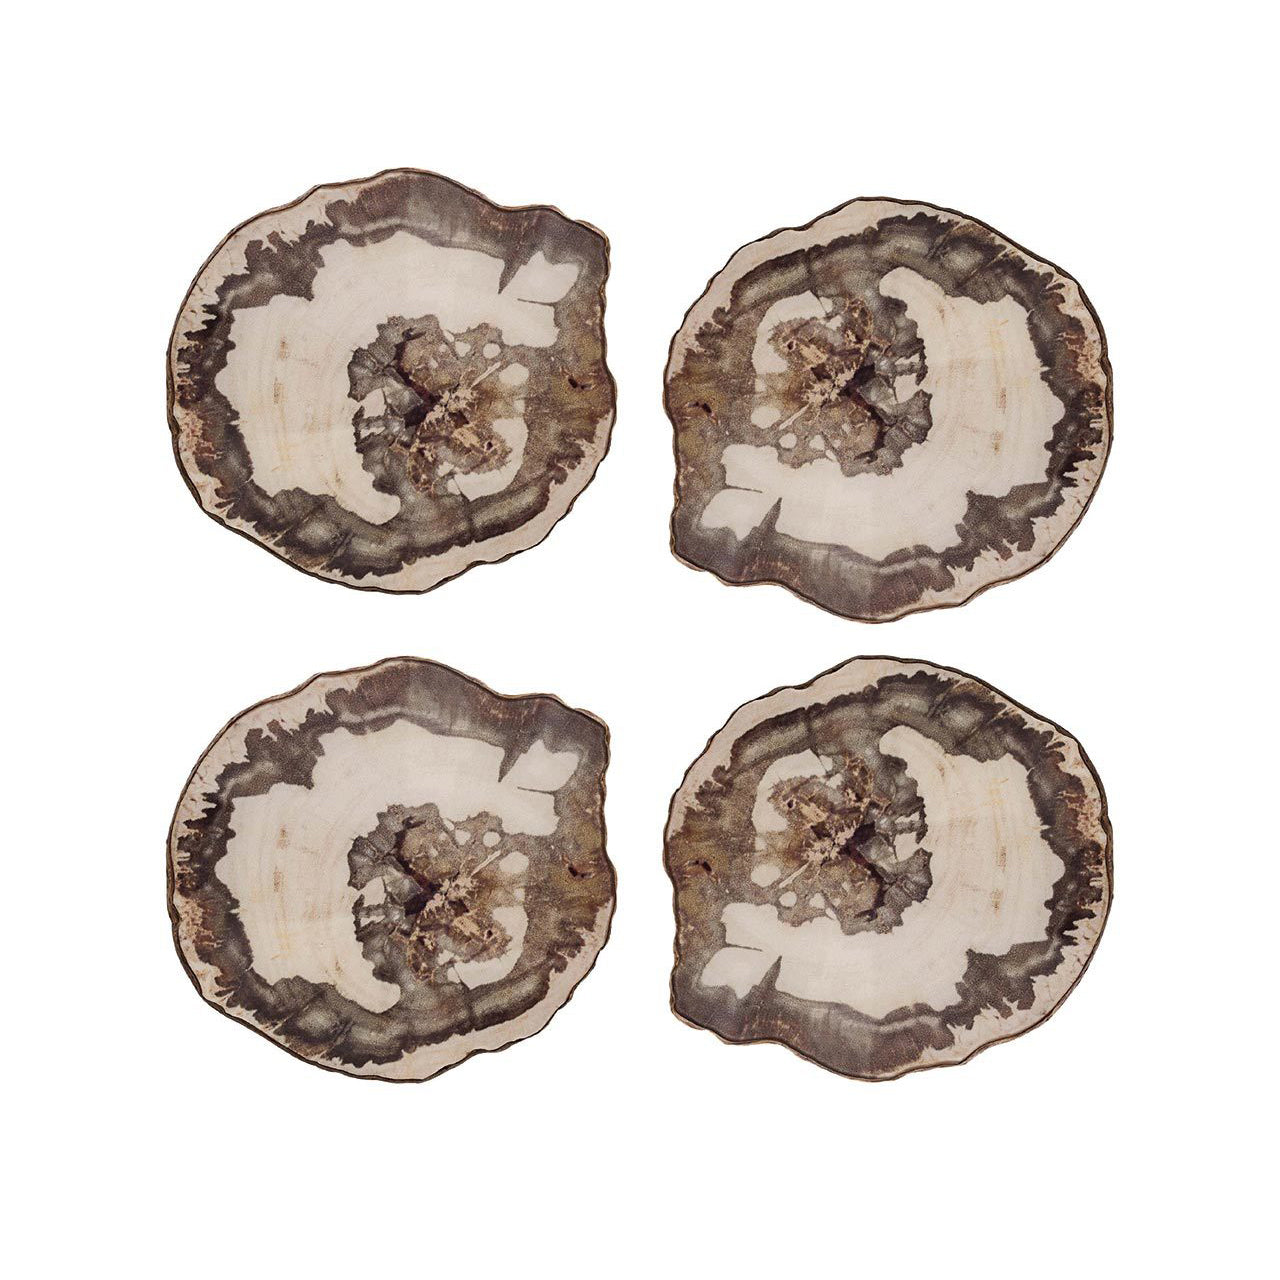 Petrified Wood Drink Coasters in Multi, Set of 4 in a Gift Box6-9198-47ec-aded-90a4029d7d63_1280x1138